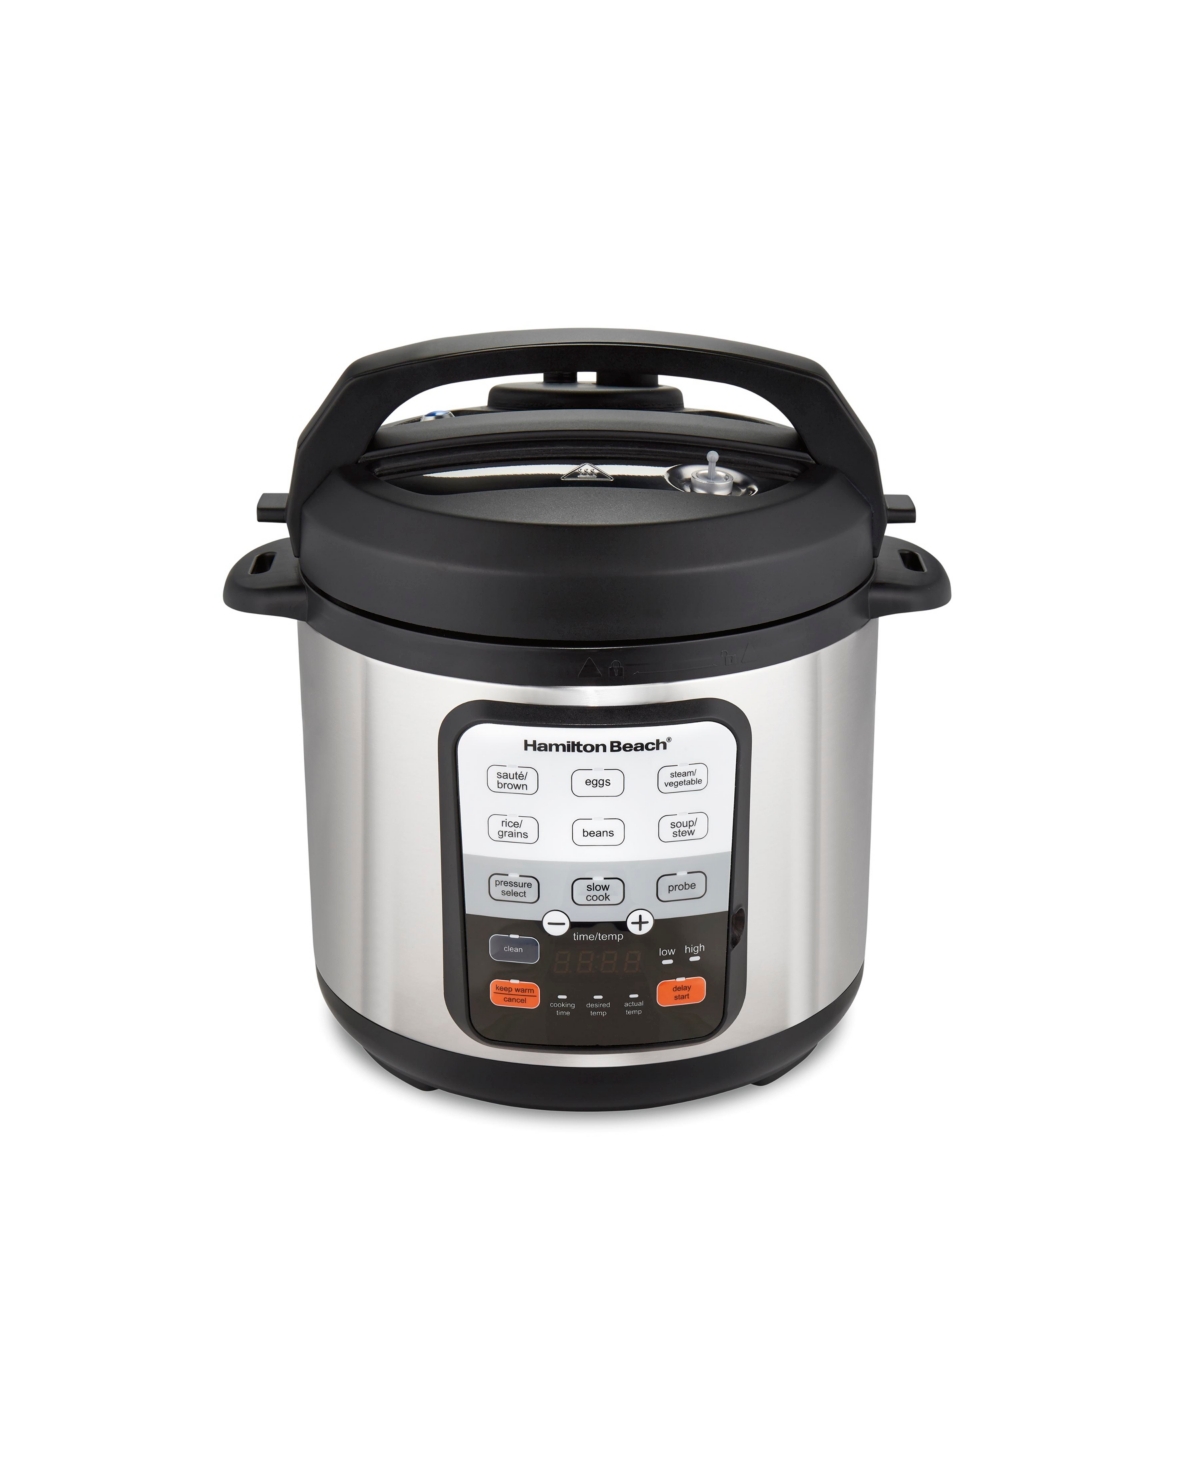 Hamilton Beach Precision Pressure Cooker In Stainless Steel